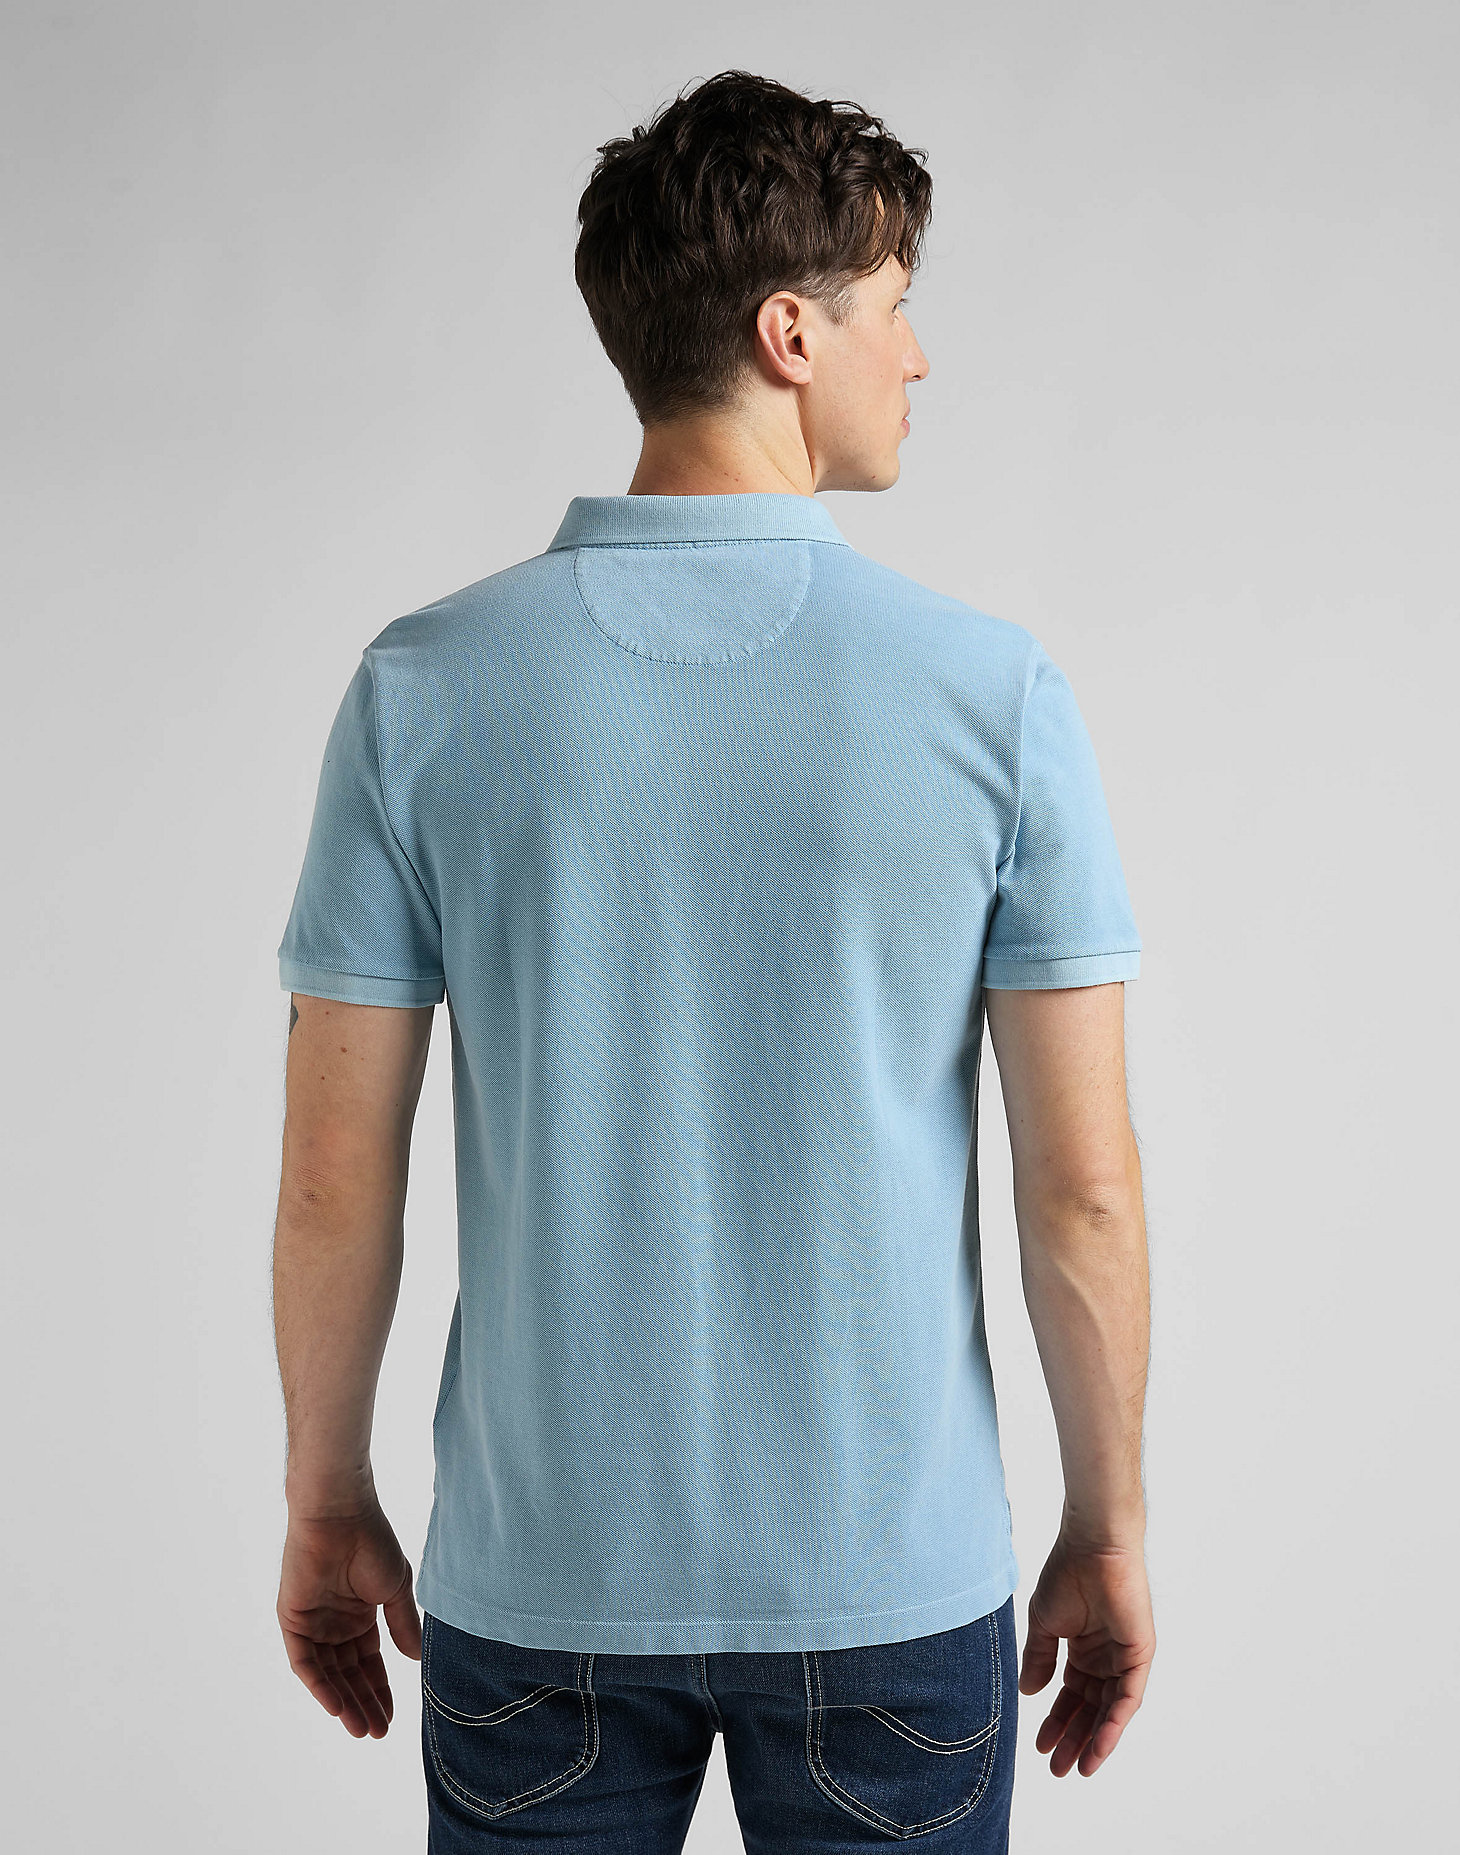 Natural Dye Polo in Ice Blue alternative view 1